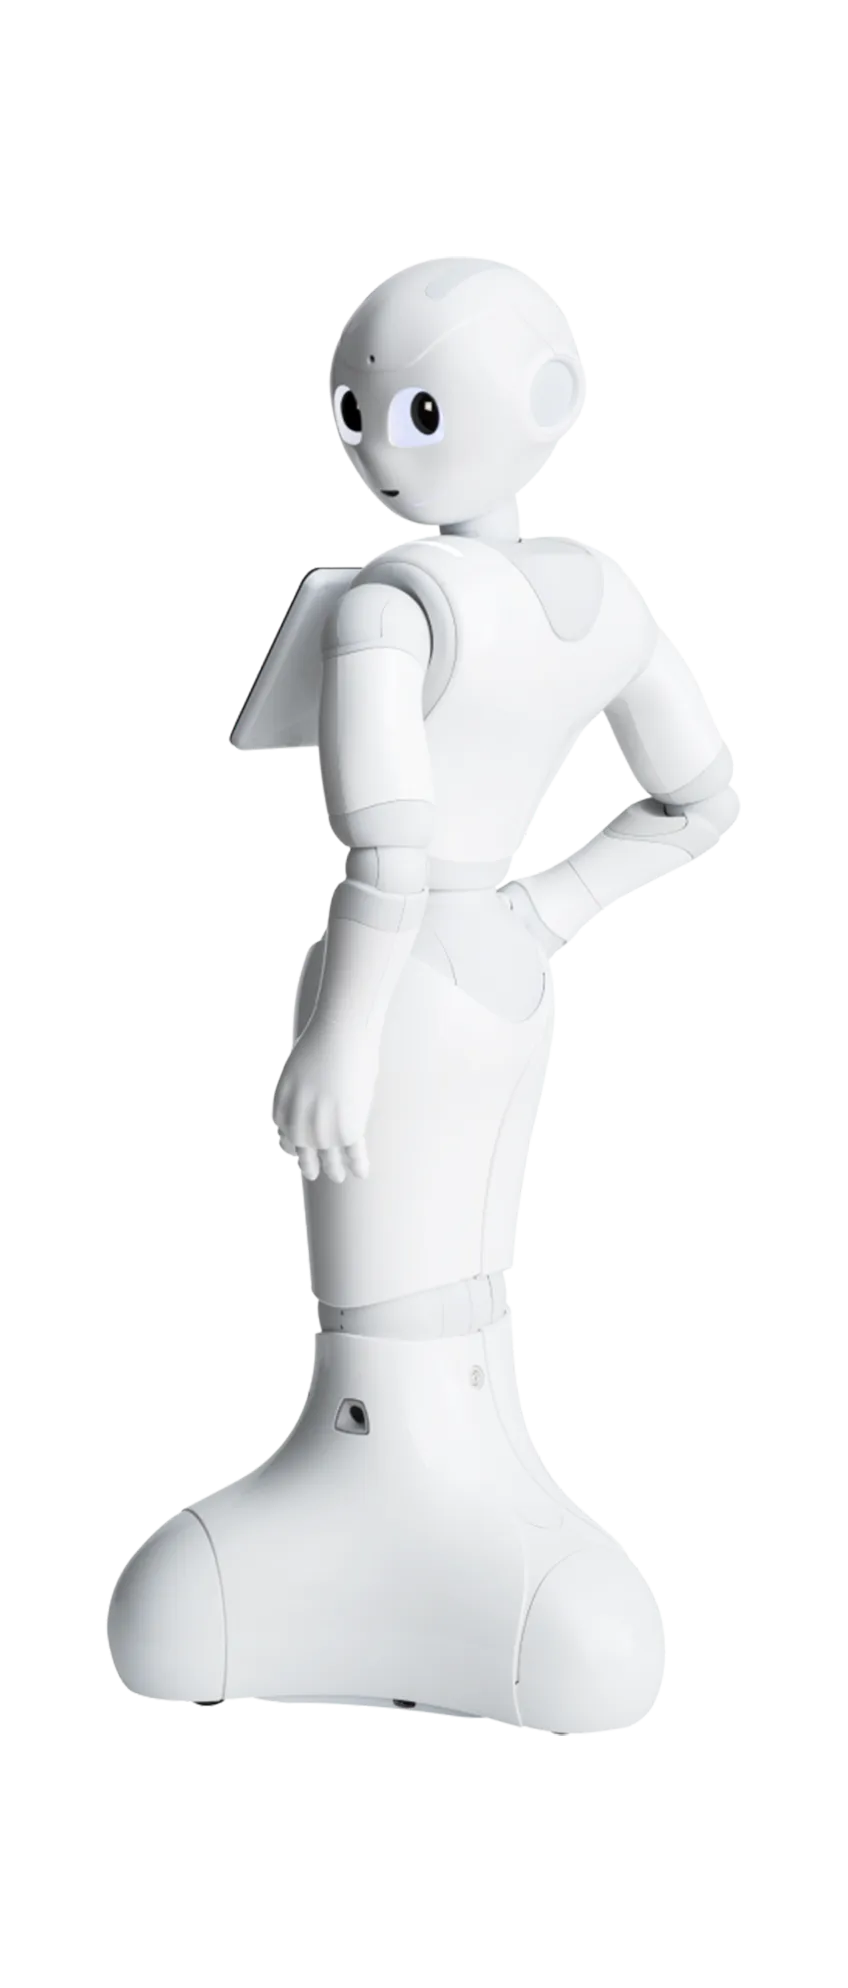 PEPPER robot - From behind